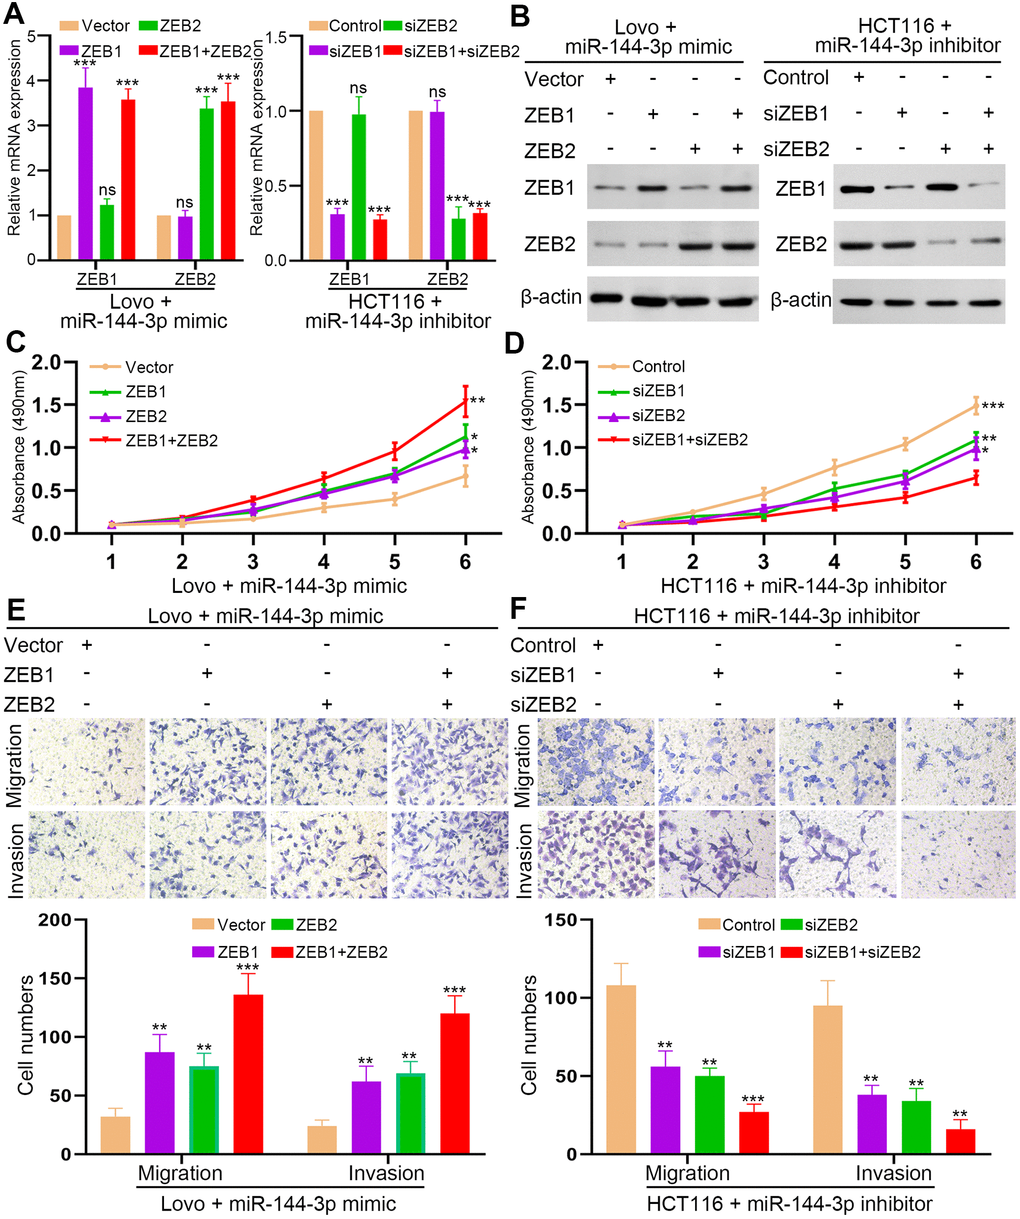 ZEB1 and ZEB2 collaboratively abrogated the inhibitory effect of miR-144-3p on CRA cell proliferation and invasion. (A) qRT-PCR analysis of ZEB1, ZEB2 expression in LovomiR-144-3p mimic cells with overexpression of ZEB1 or/and ZEB2 and in HCT116miR-144-3p inhibitor cells with knockdown of ZEB1 or/and ZEB2. (B) Western blot analysis of protein expression of ZEB1 and ZEB2 in indicated cells. (C) MTT assay of proliferation ability of LovomiR-144-3p mimic cells. (D) MTT assay of proliferation ability of HCT116miR-144-3p inhibitor cells. (E) Transwell migration and invasion assays of the migration and invasion of LovomiR-144-3p mimic cells. (F) Transwell migration and invasion assay of HCT116miR-144-3p inhibitor cells after knockdown of ZEB1 or/and ZEB2. *, PPP 